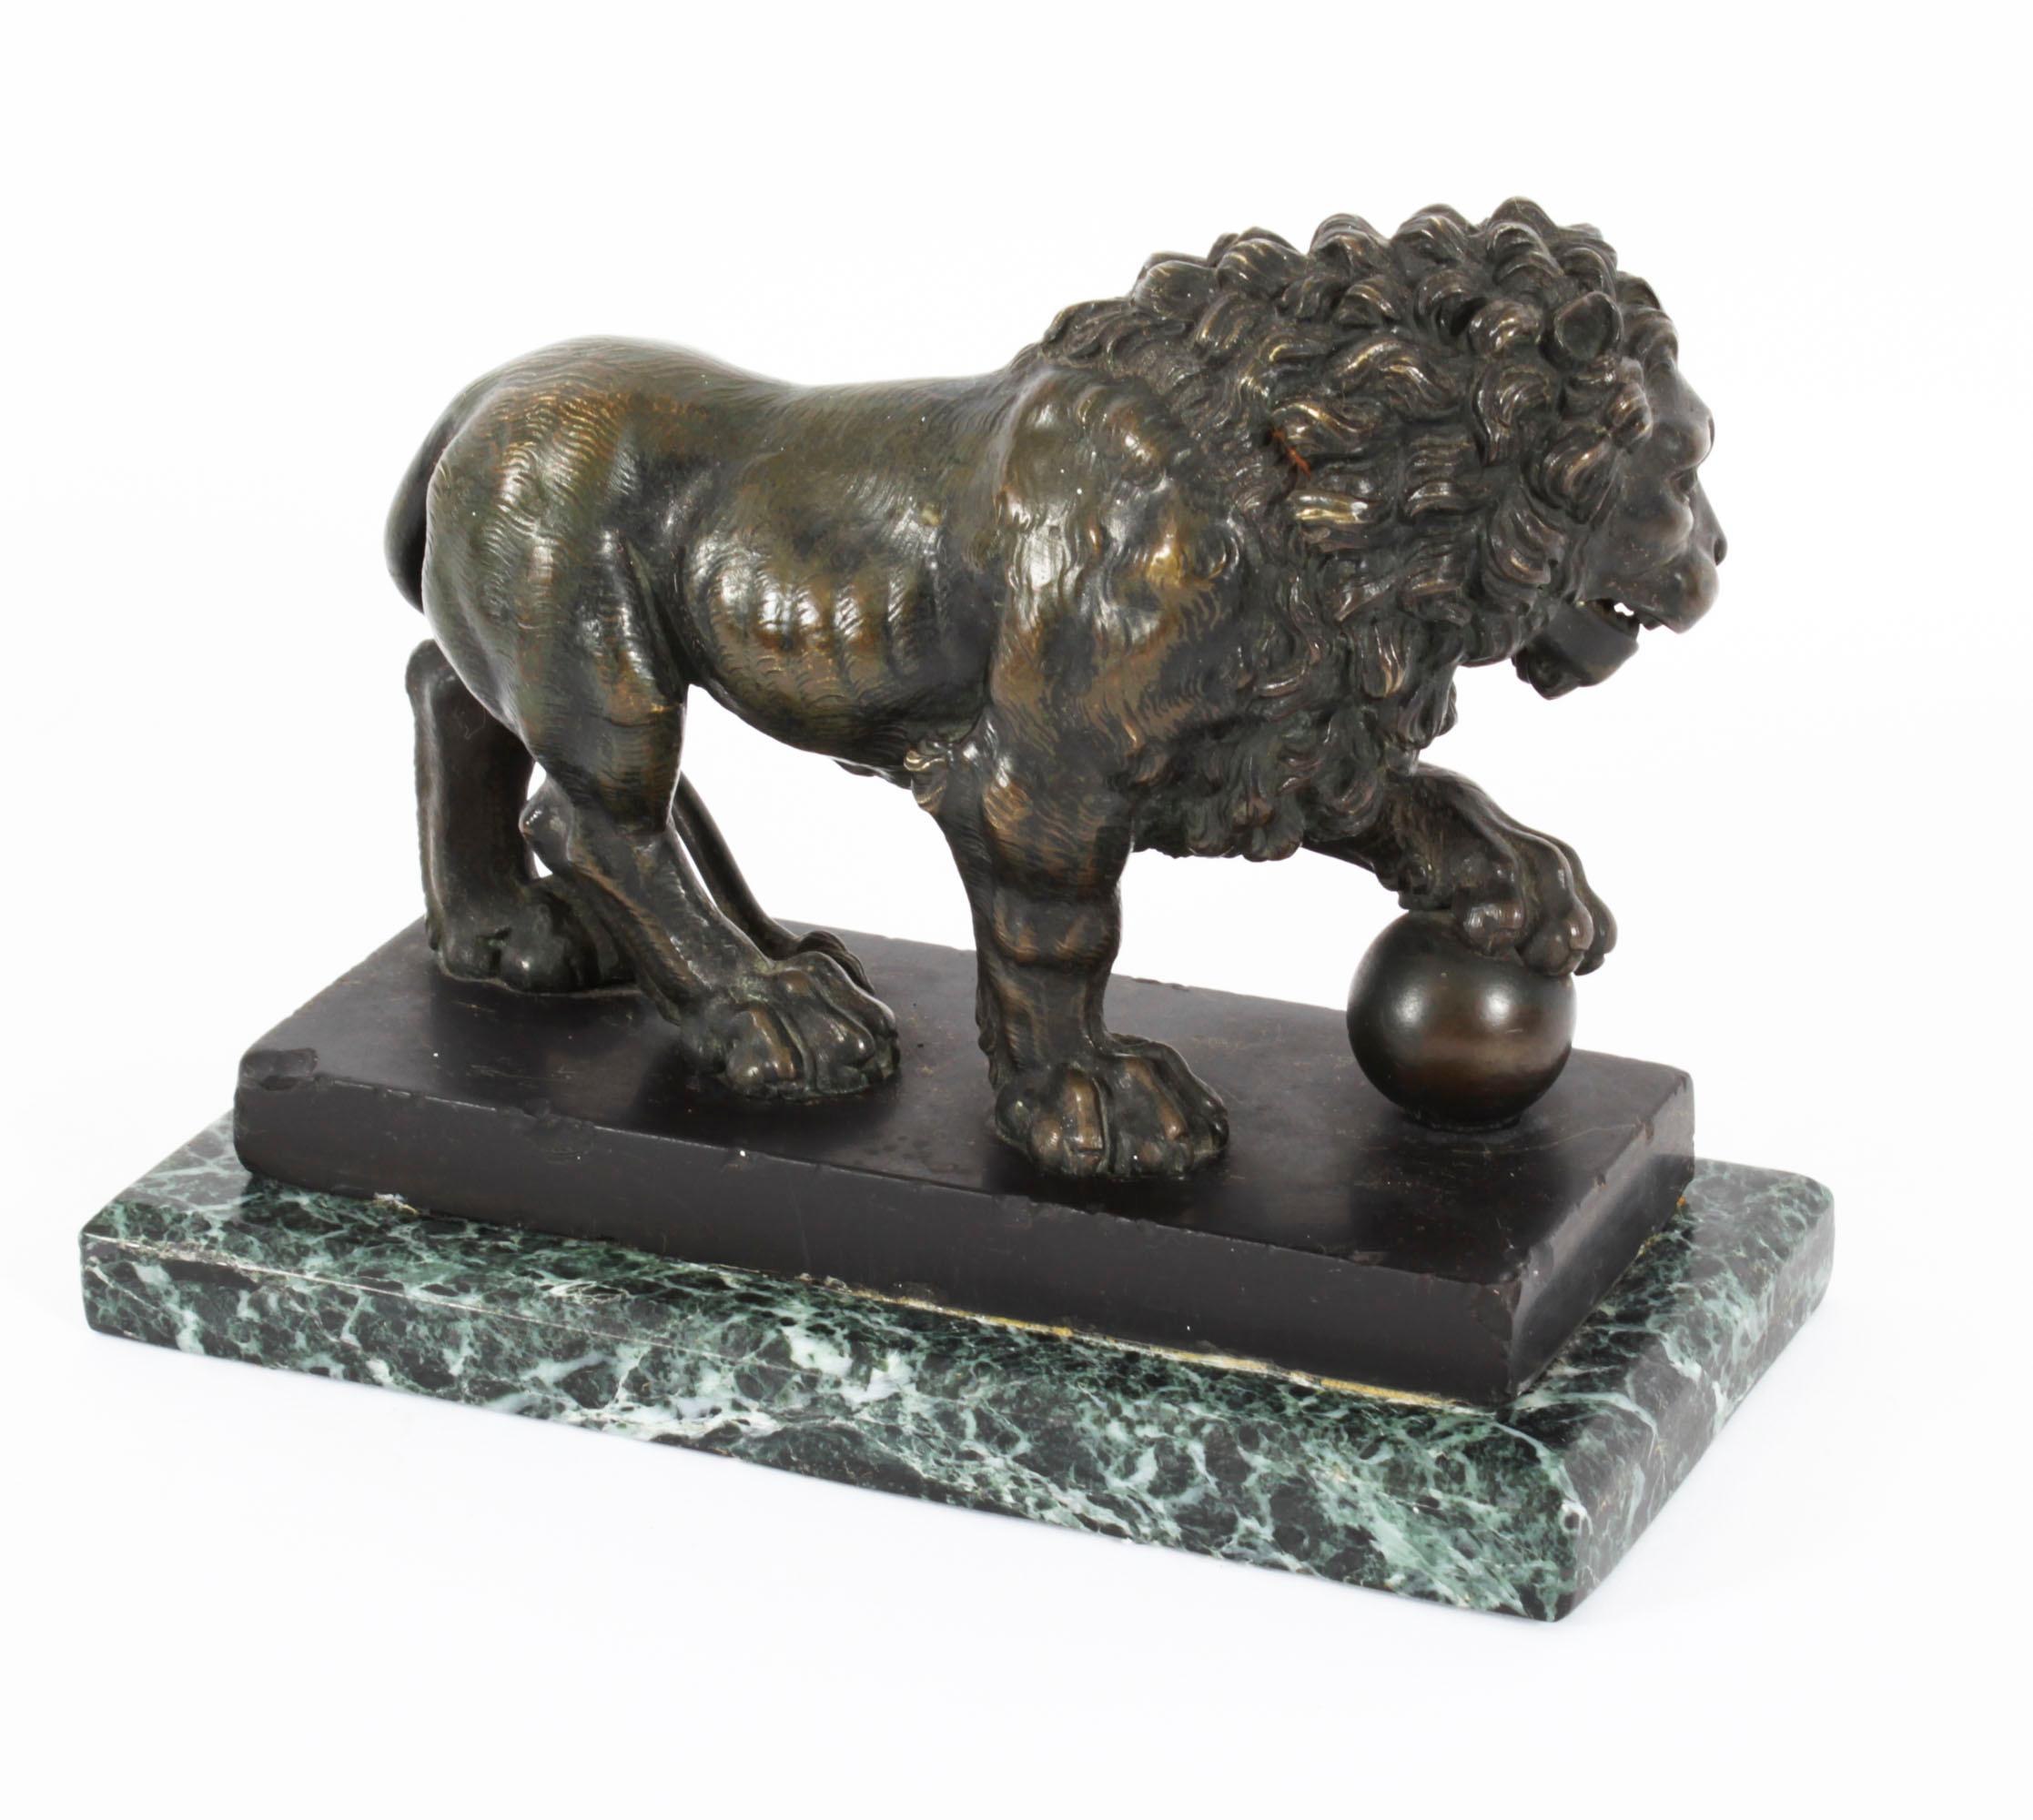 Antique French Bronze Sculpture of the Medici Lion, 19th Century 5